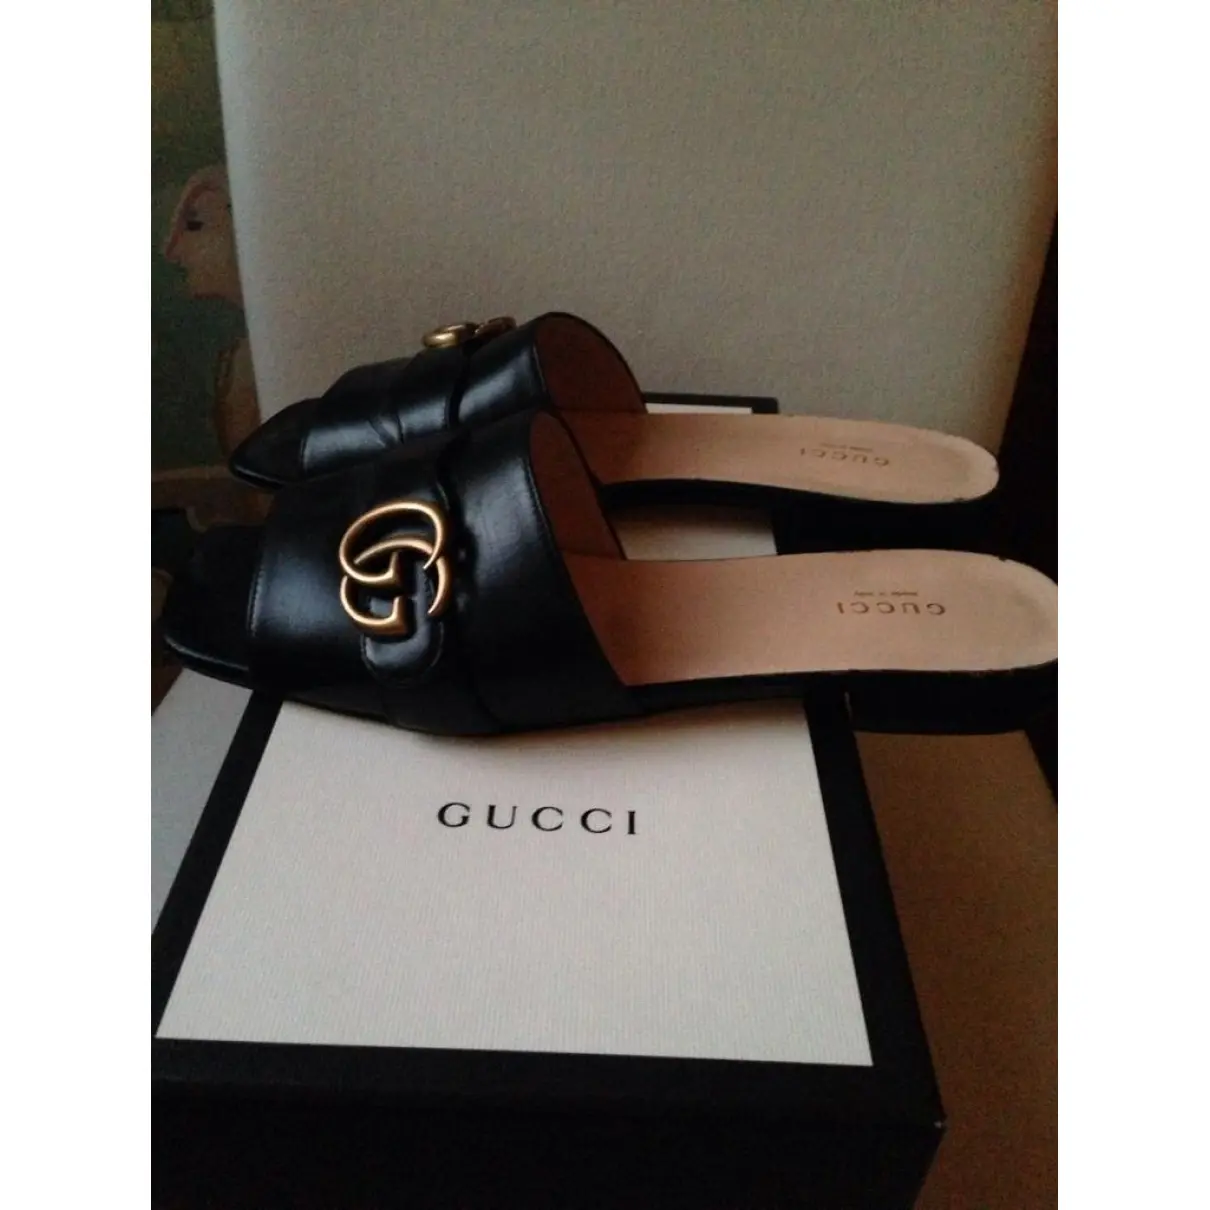 Buy Gucci Marmont leather mules online